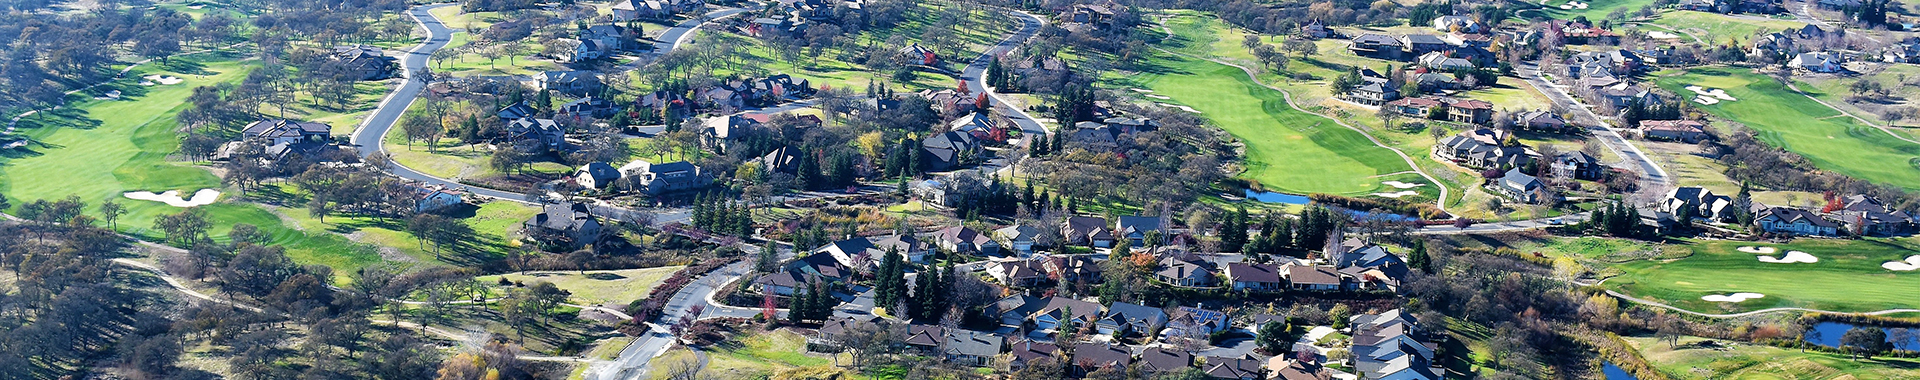 Aerial view of Copper Valley rural area.